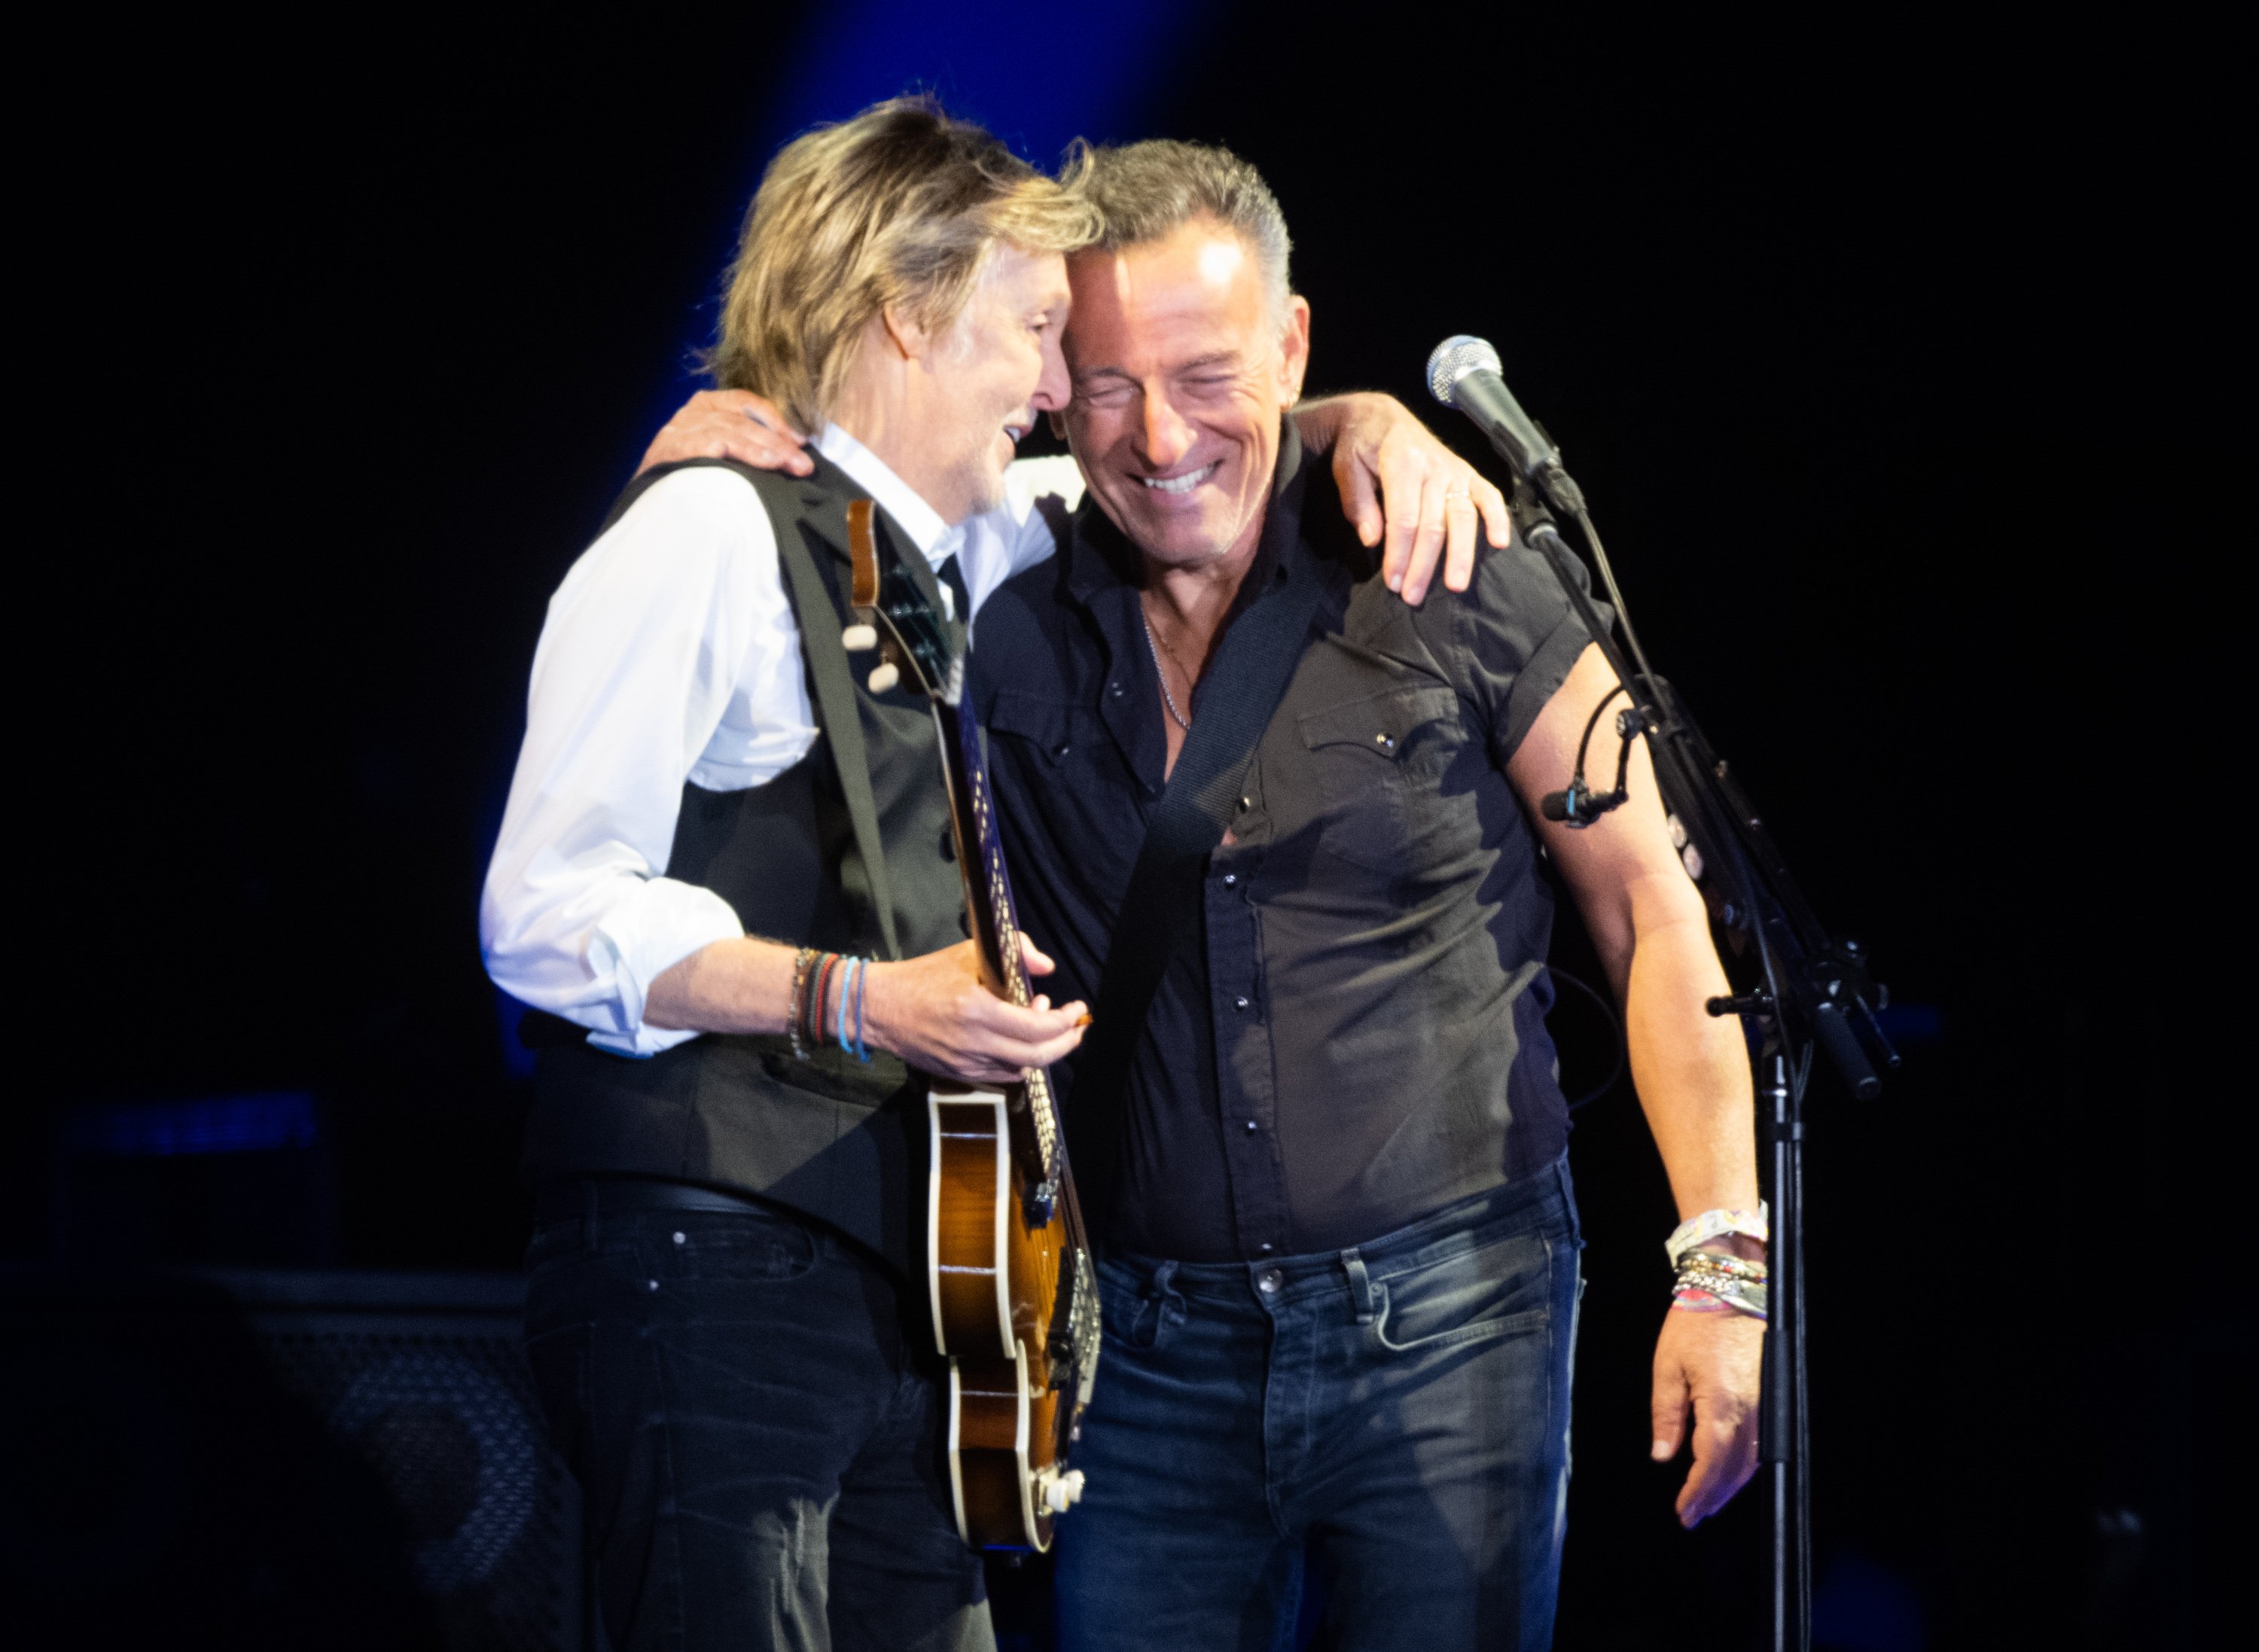 Bruce Springsteen performs with Paul McCartney of The Beatles at the 2022 Glastonbury Festival in England